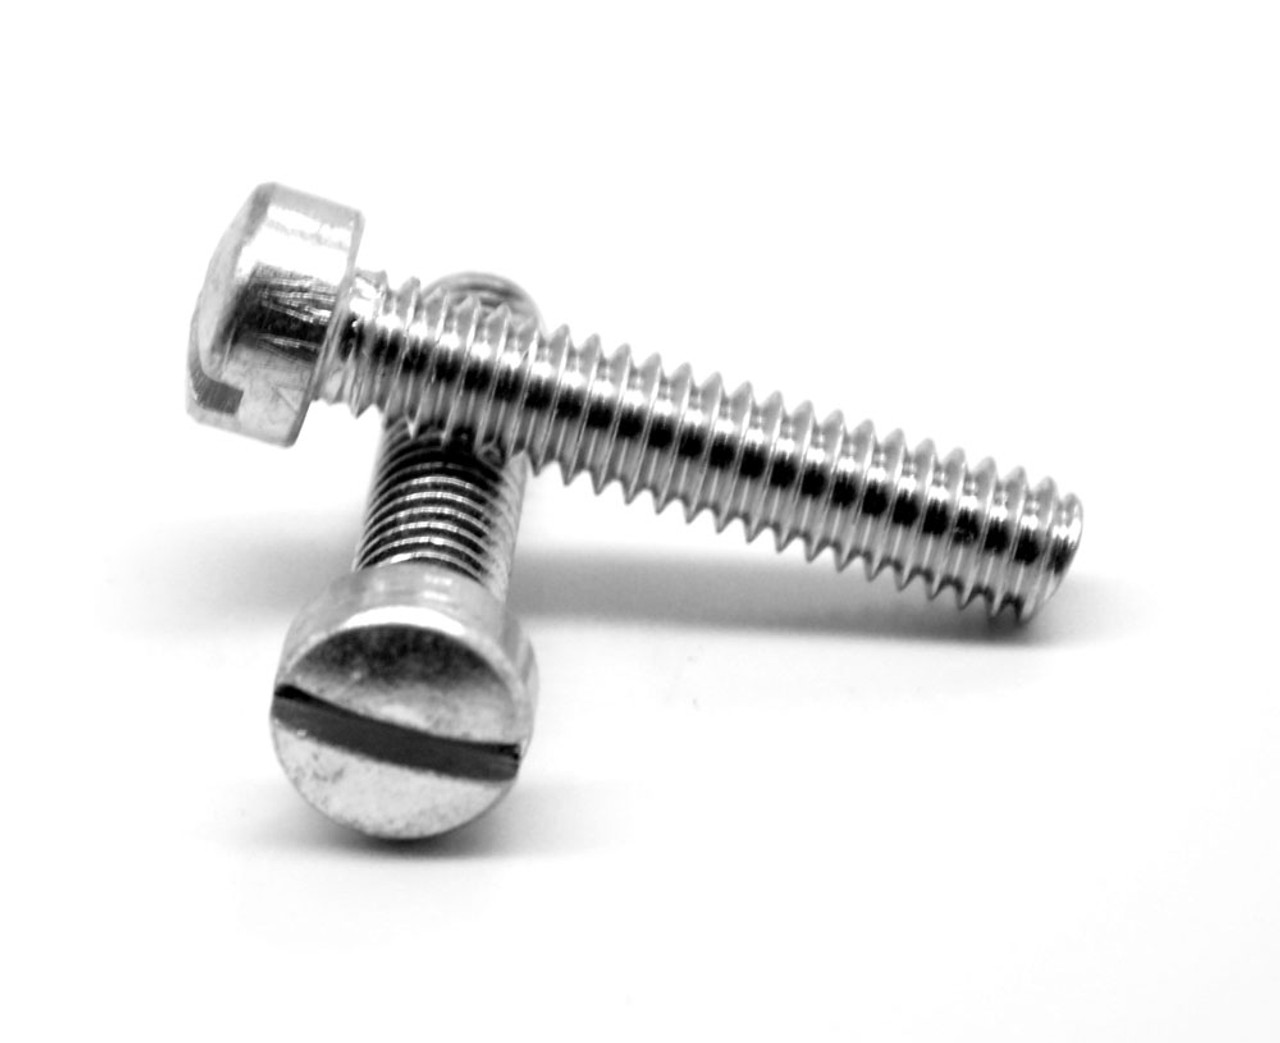 #12-24 x 3/4" (FT) Coarse Thread Machine Screw Slotted Fillister Head Stainless Steel 18-8